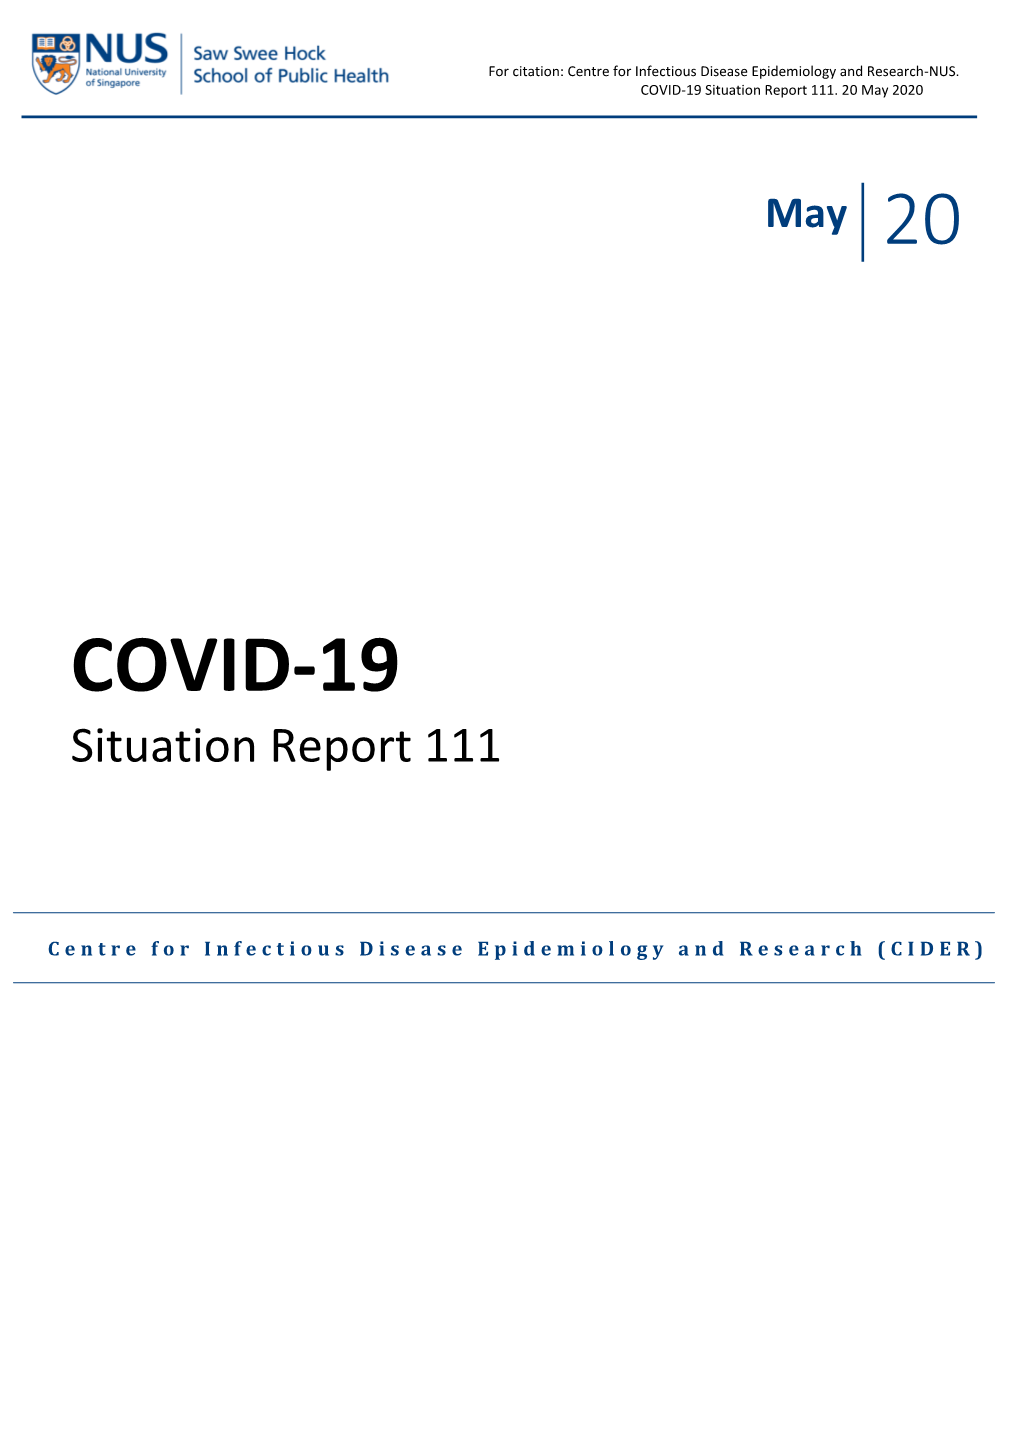 COVID-19 Situation Report 111